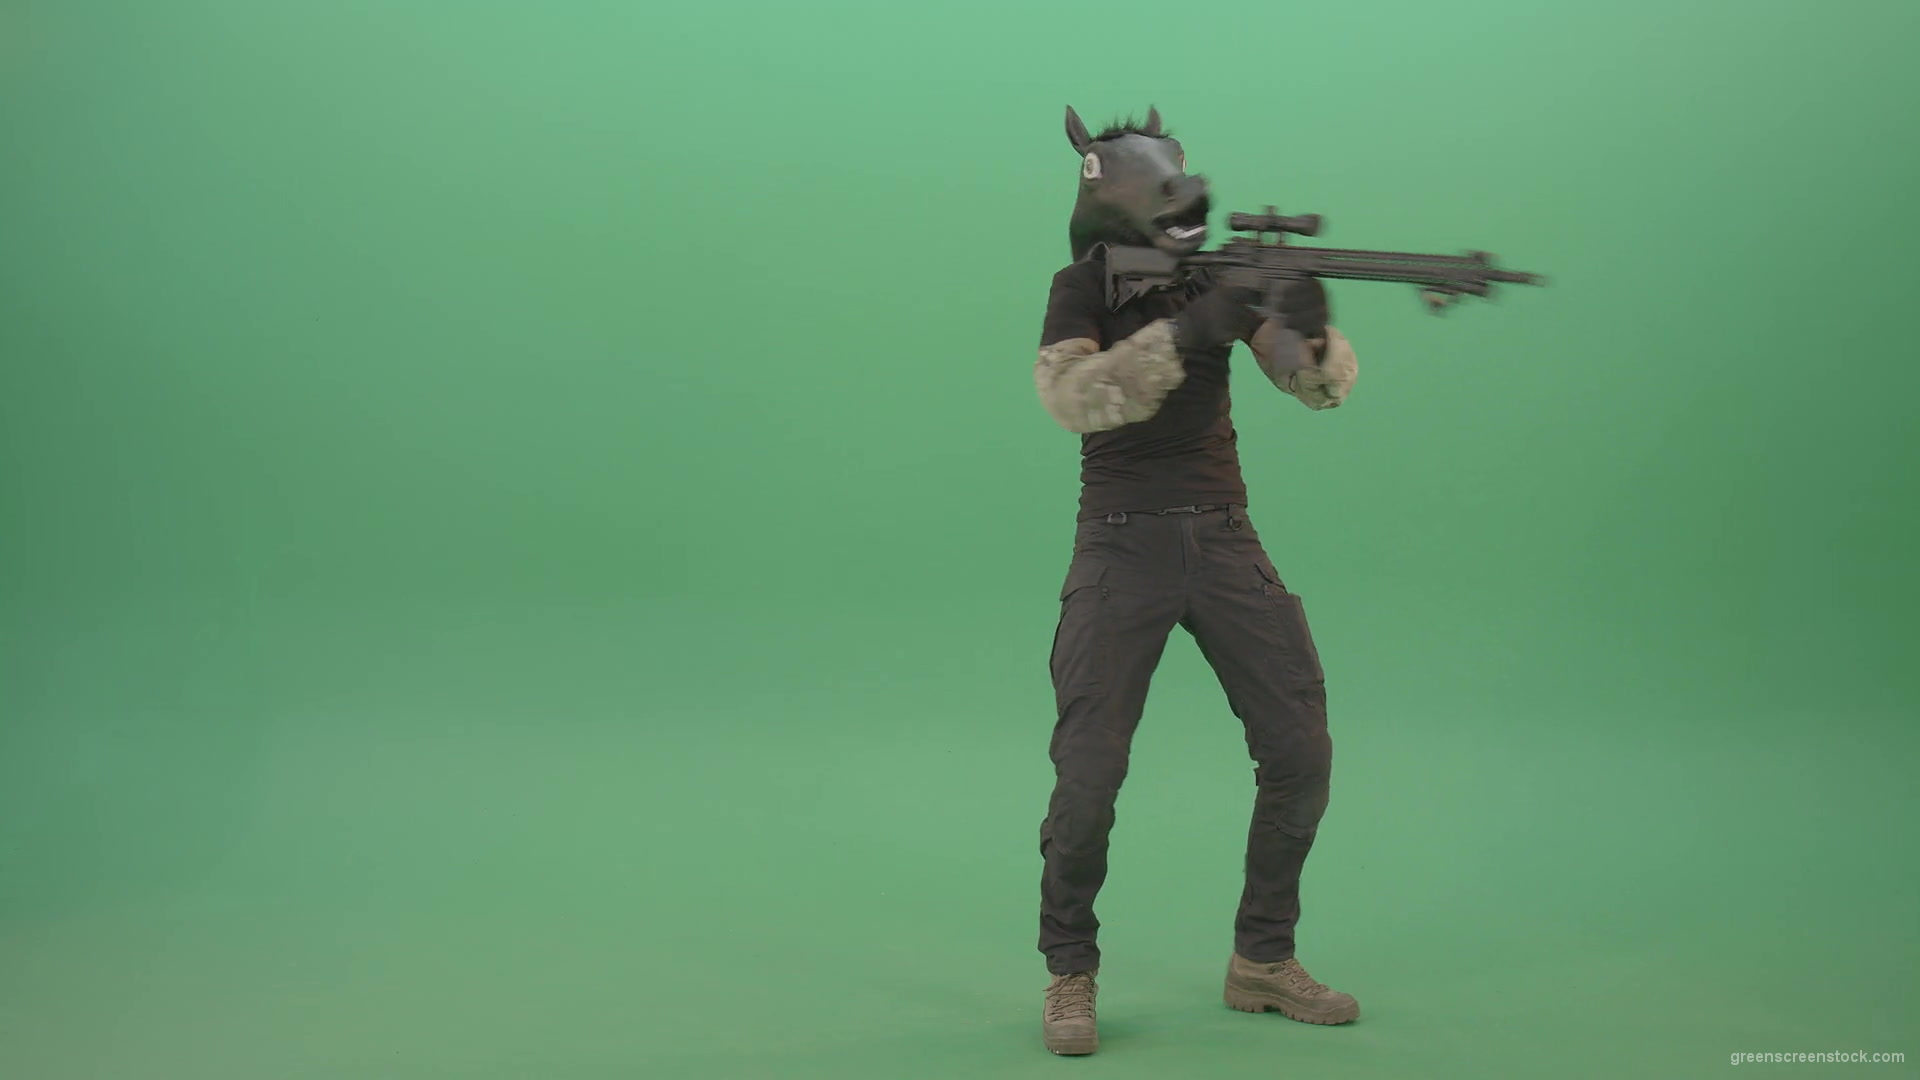 Front-view-Army-Man-in-horse-mask-shooting-from-Machine-Gun-isolated-on-Chromakey-Green-Screen-4K-Video-Footage-1920_008 Green Screen Stock